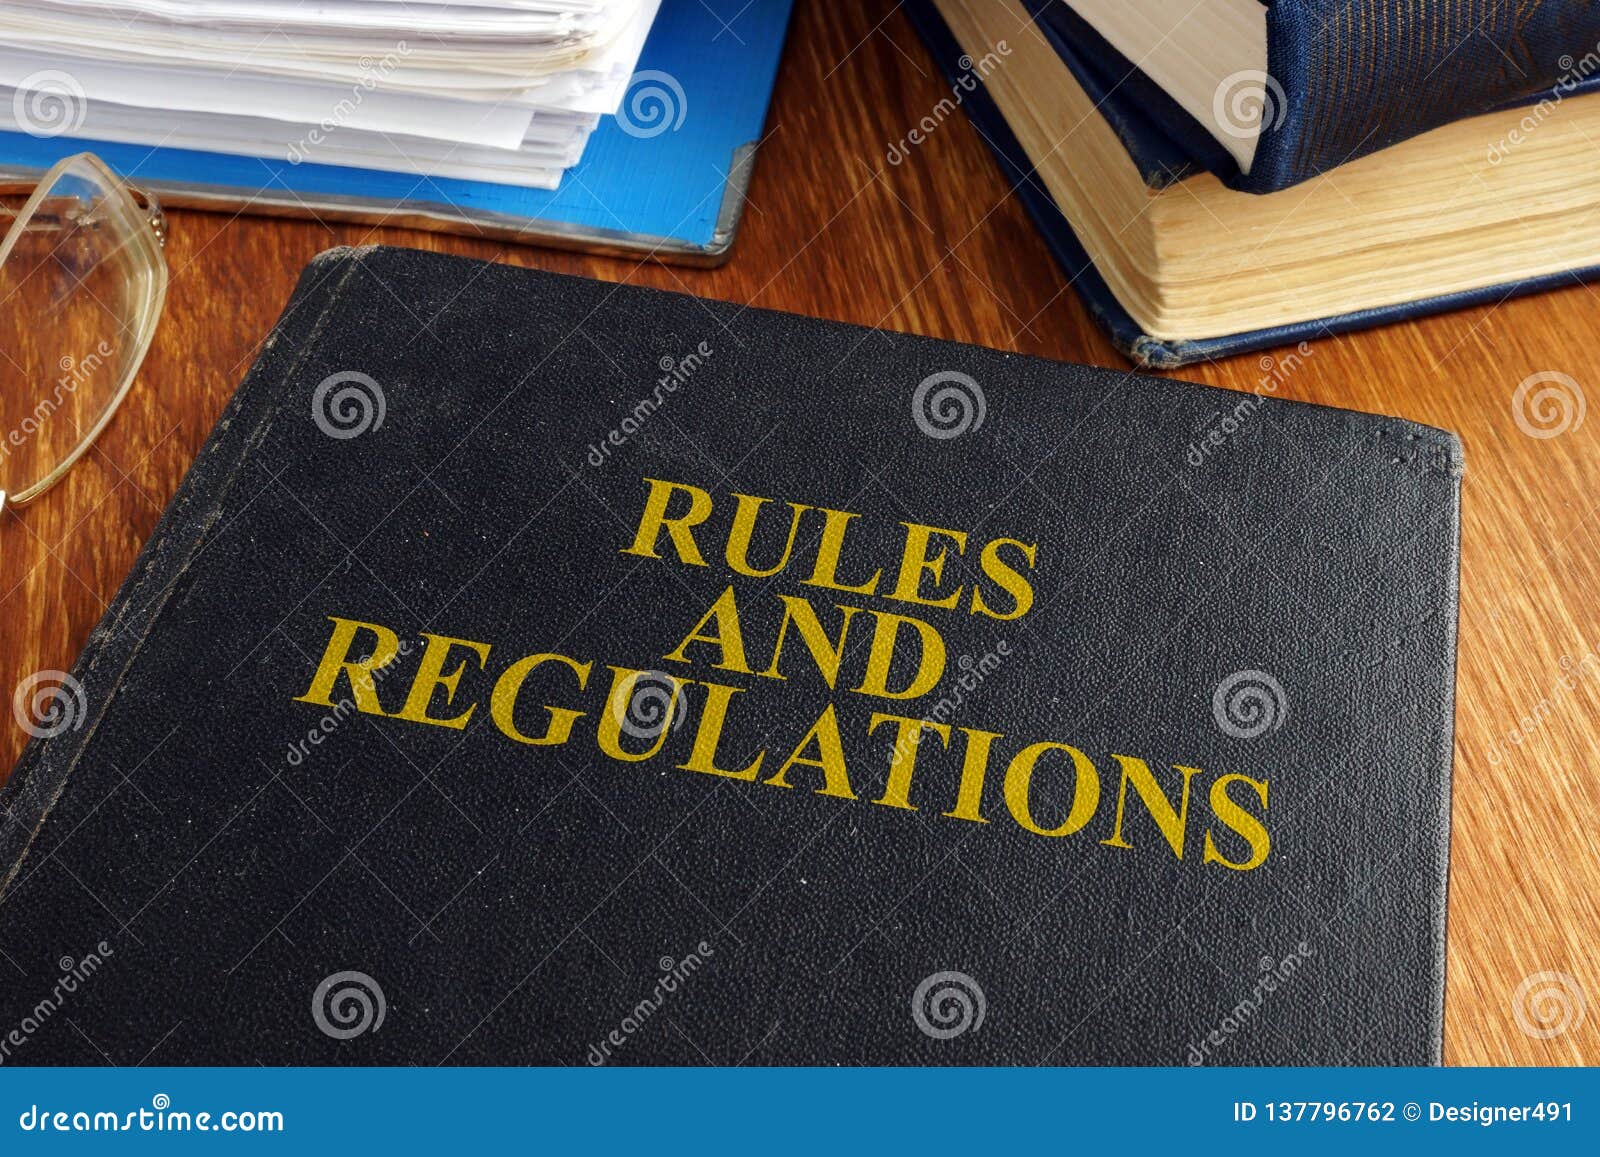 rules and regulations book.